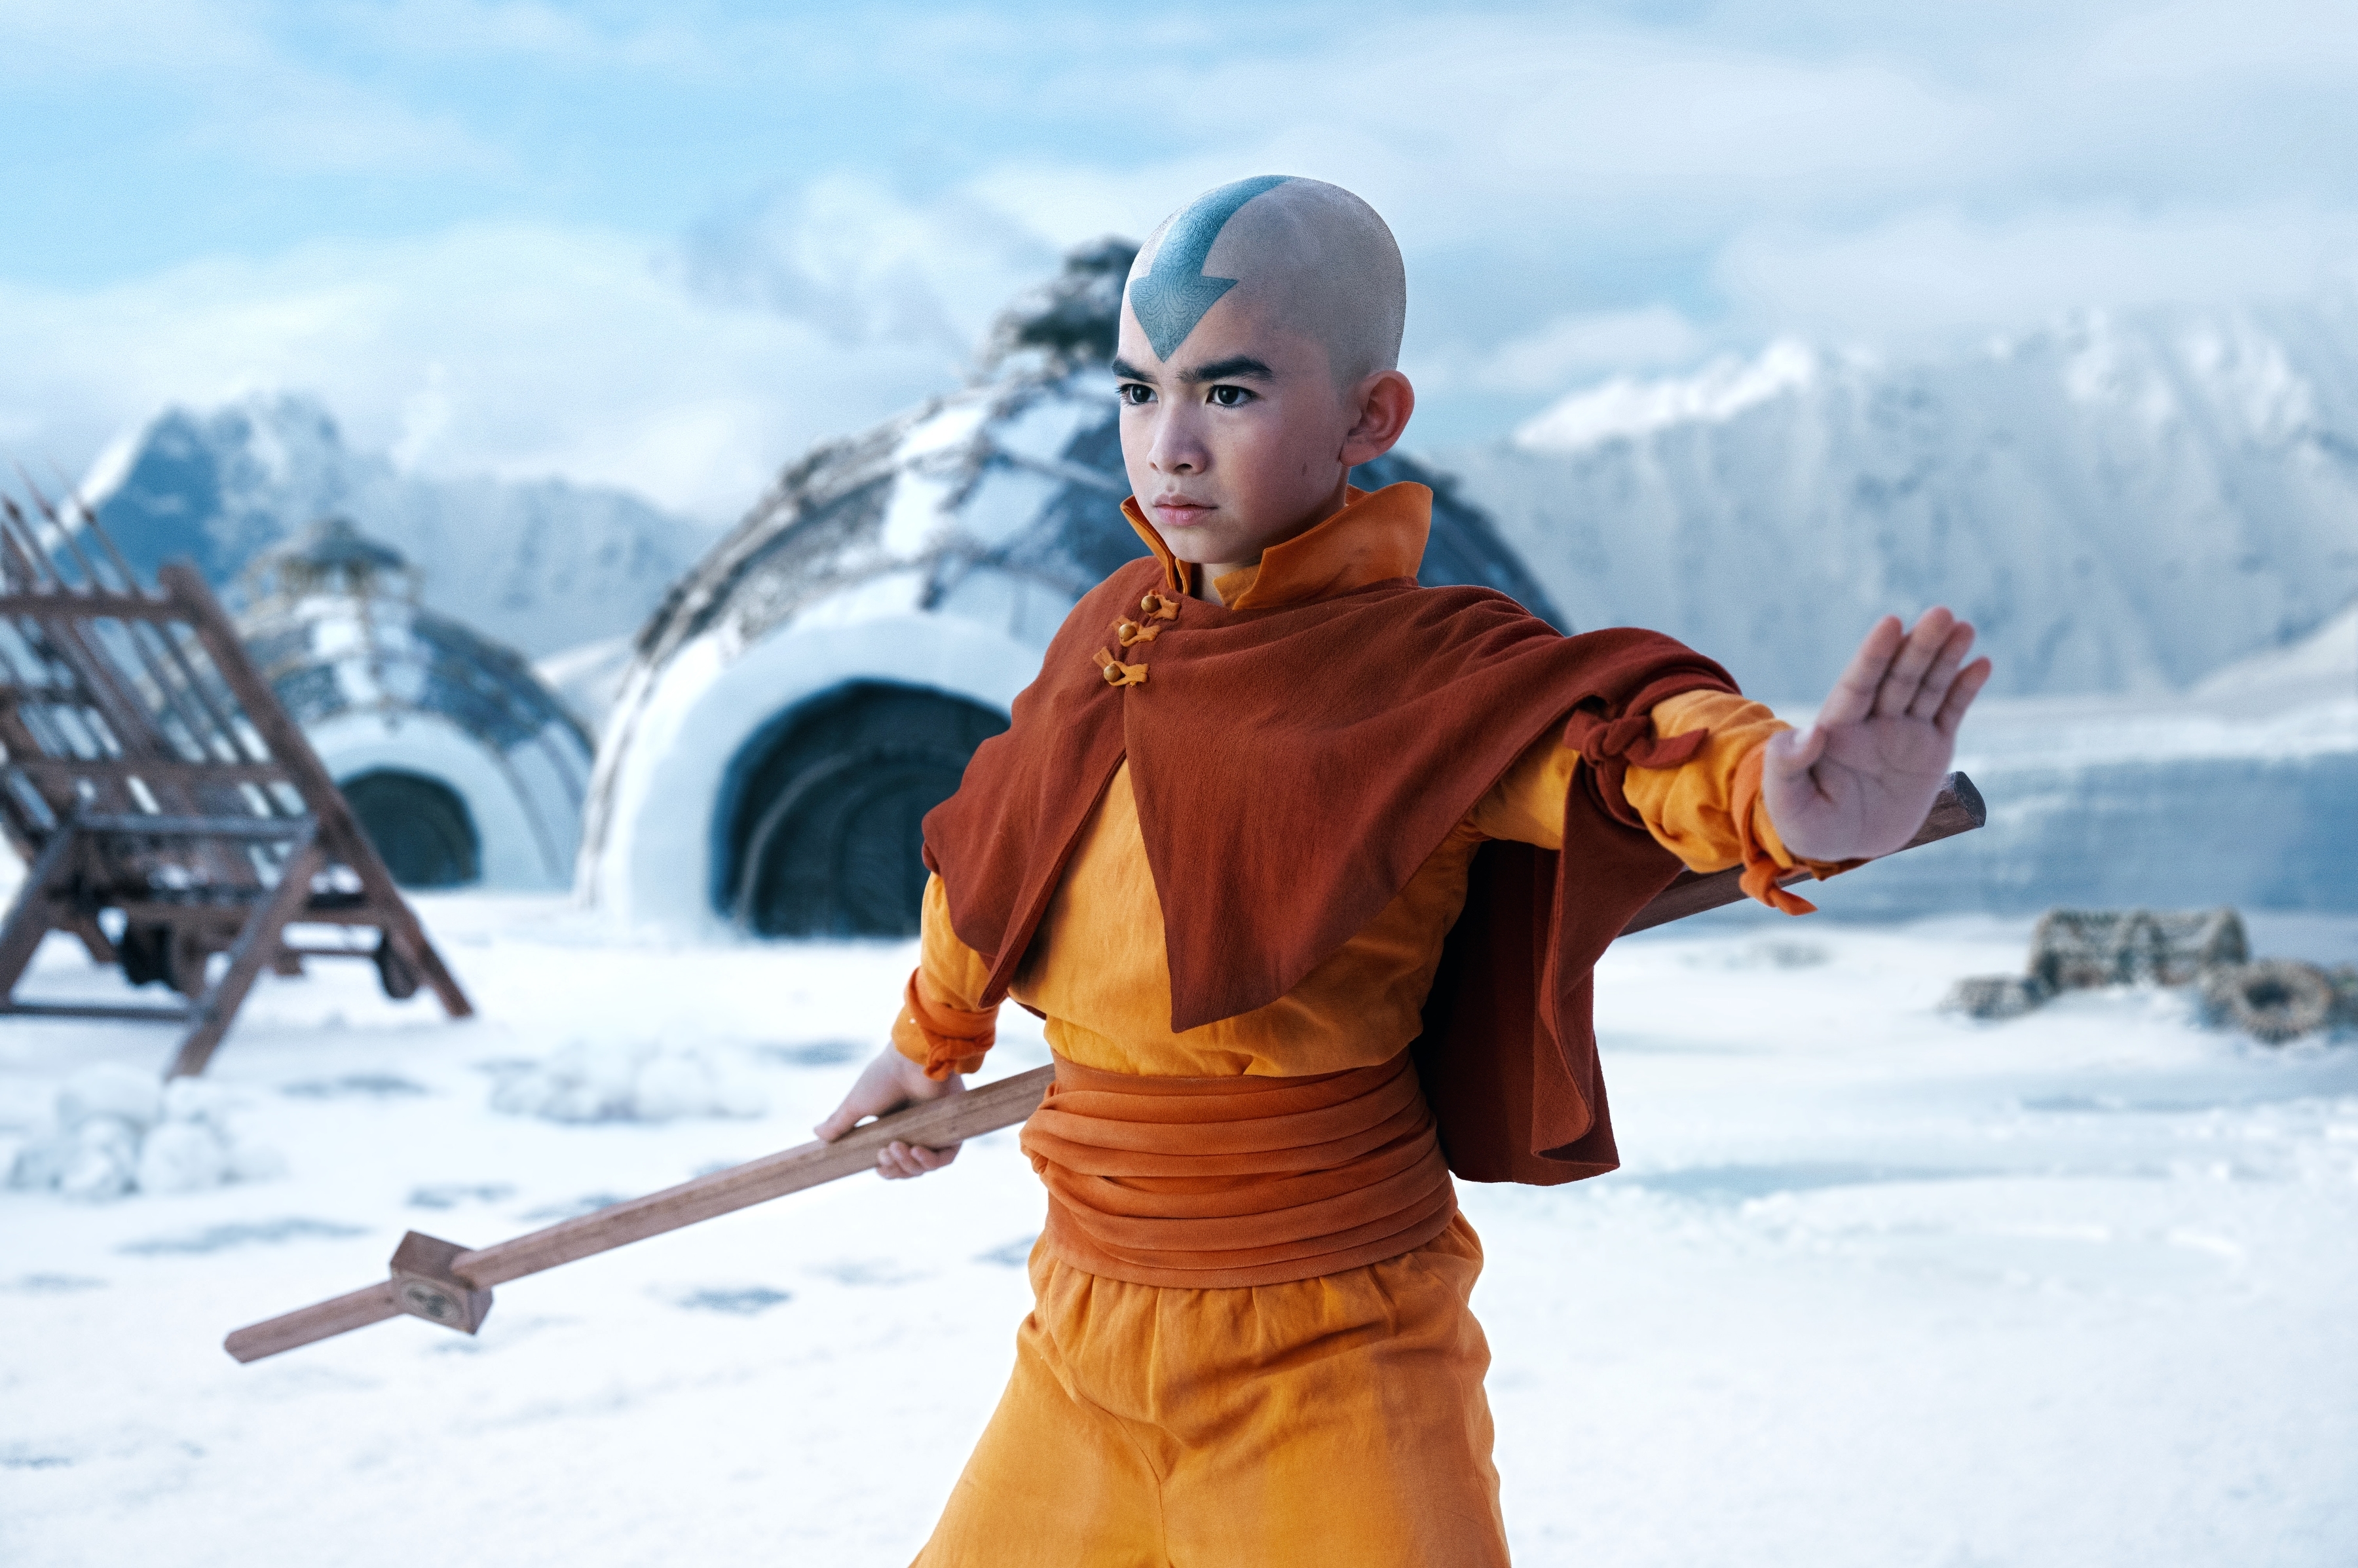 Gordon dressed as Aang from Avatar: The Last Airbender, posing with a staff in a snowy landscape